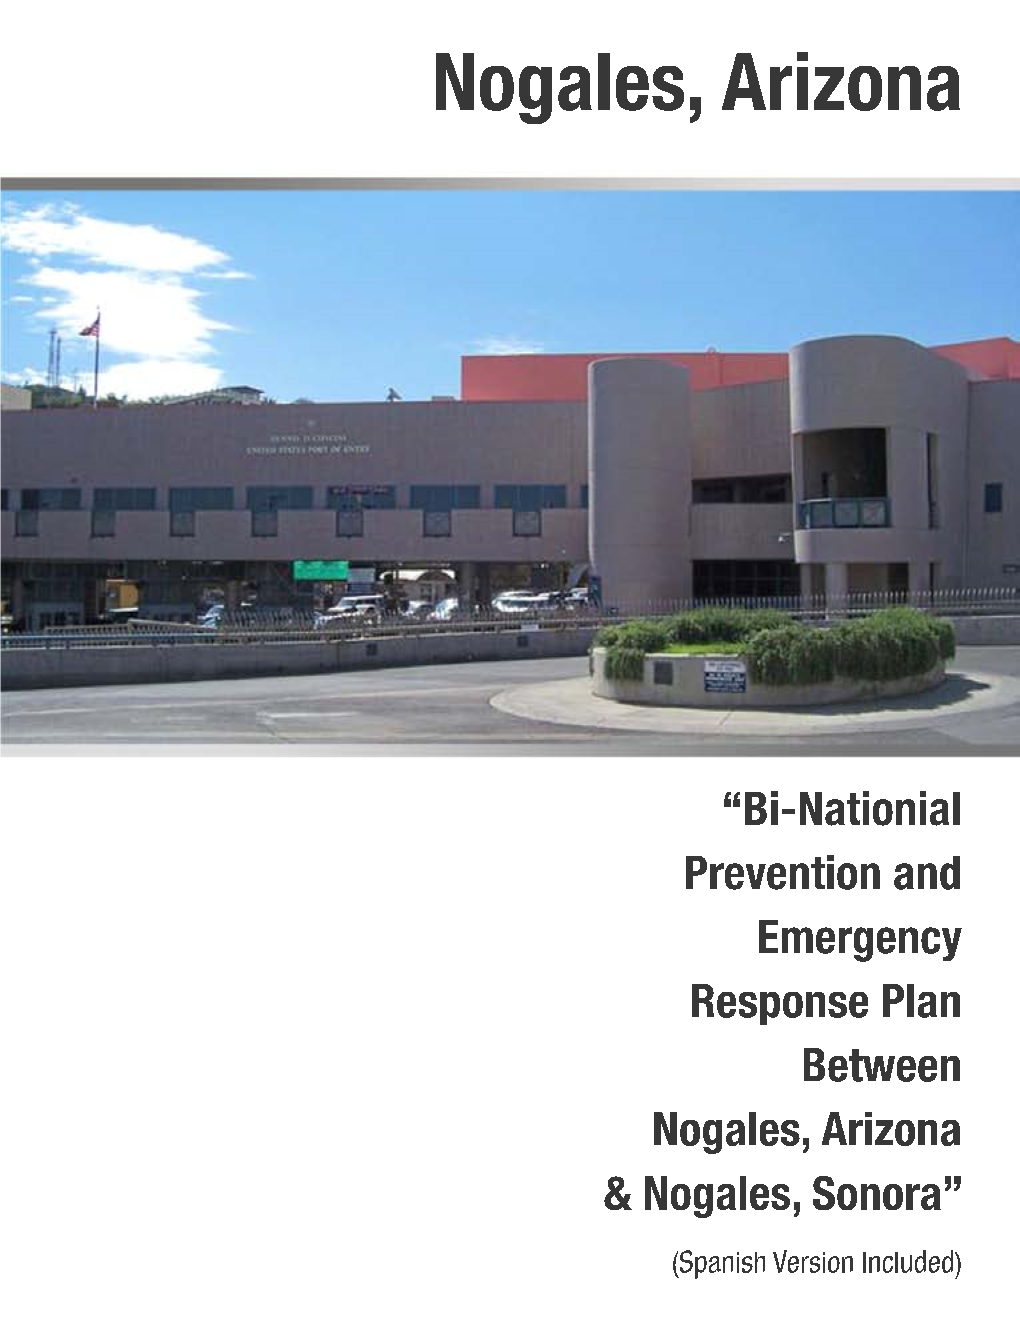 Binational Prevention and Emergency Response Plan Between Nogales, Arizona and Nogales, Sonoara